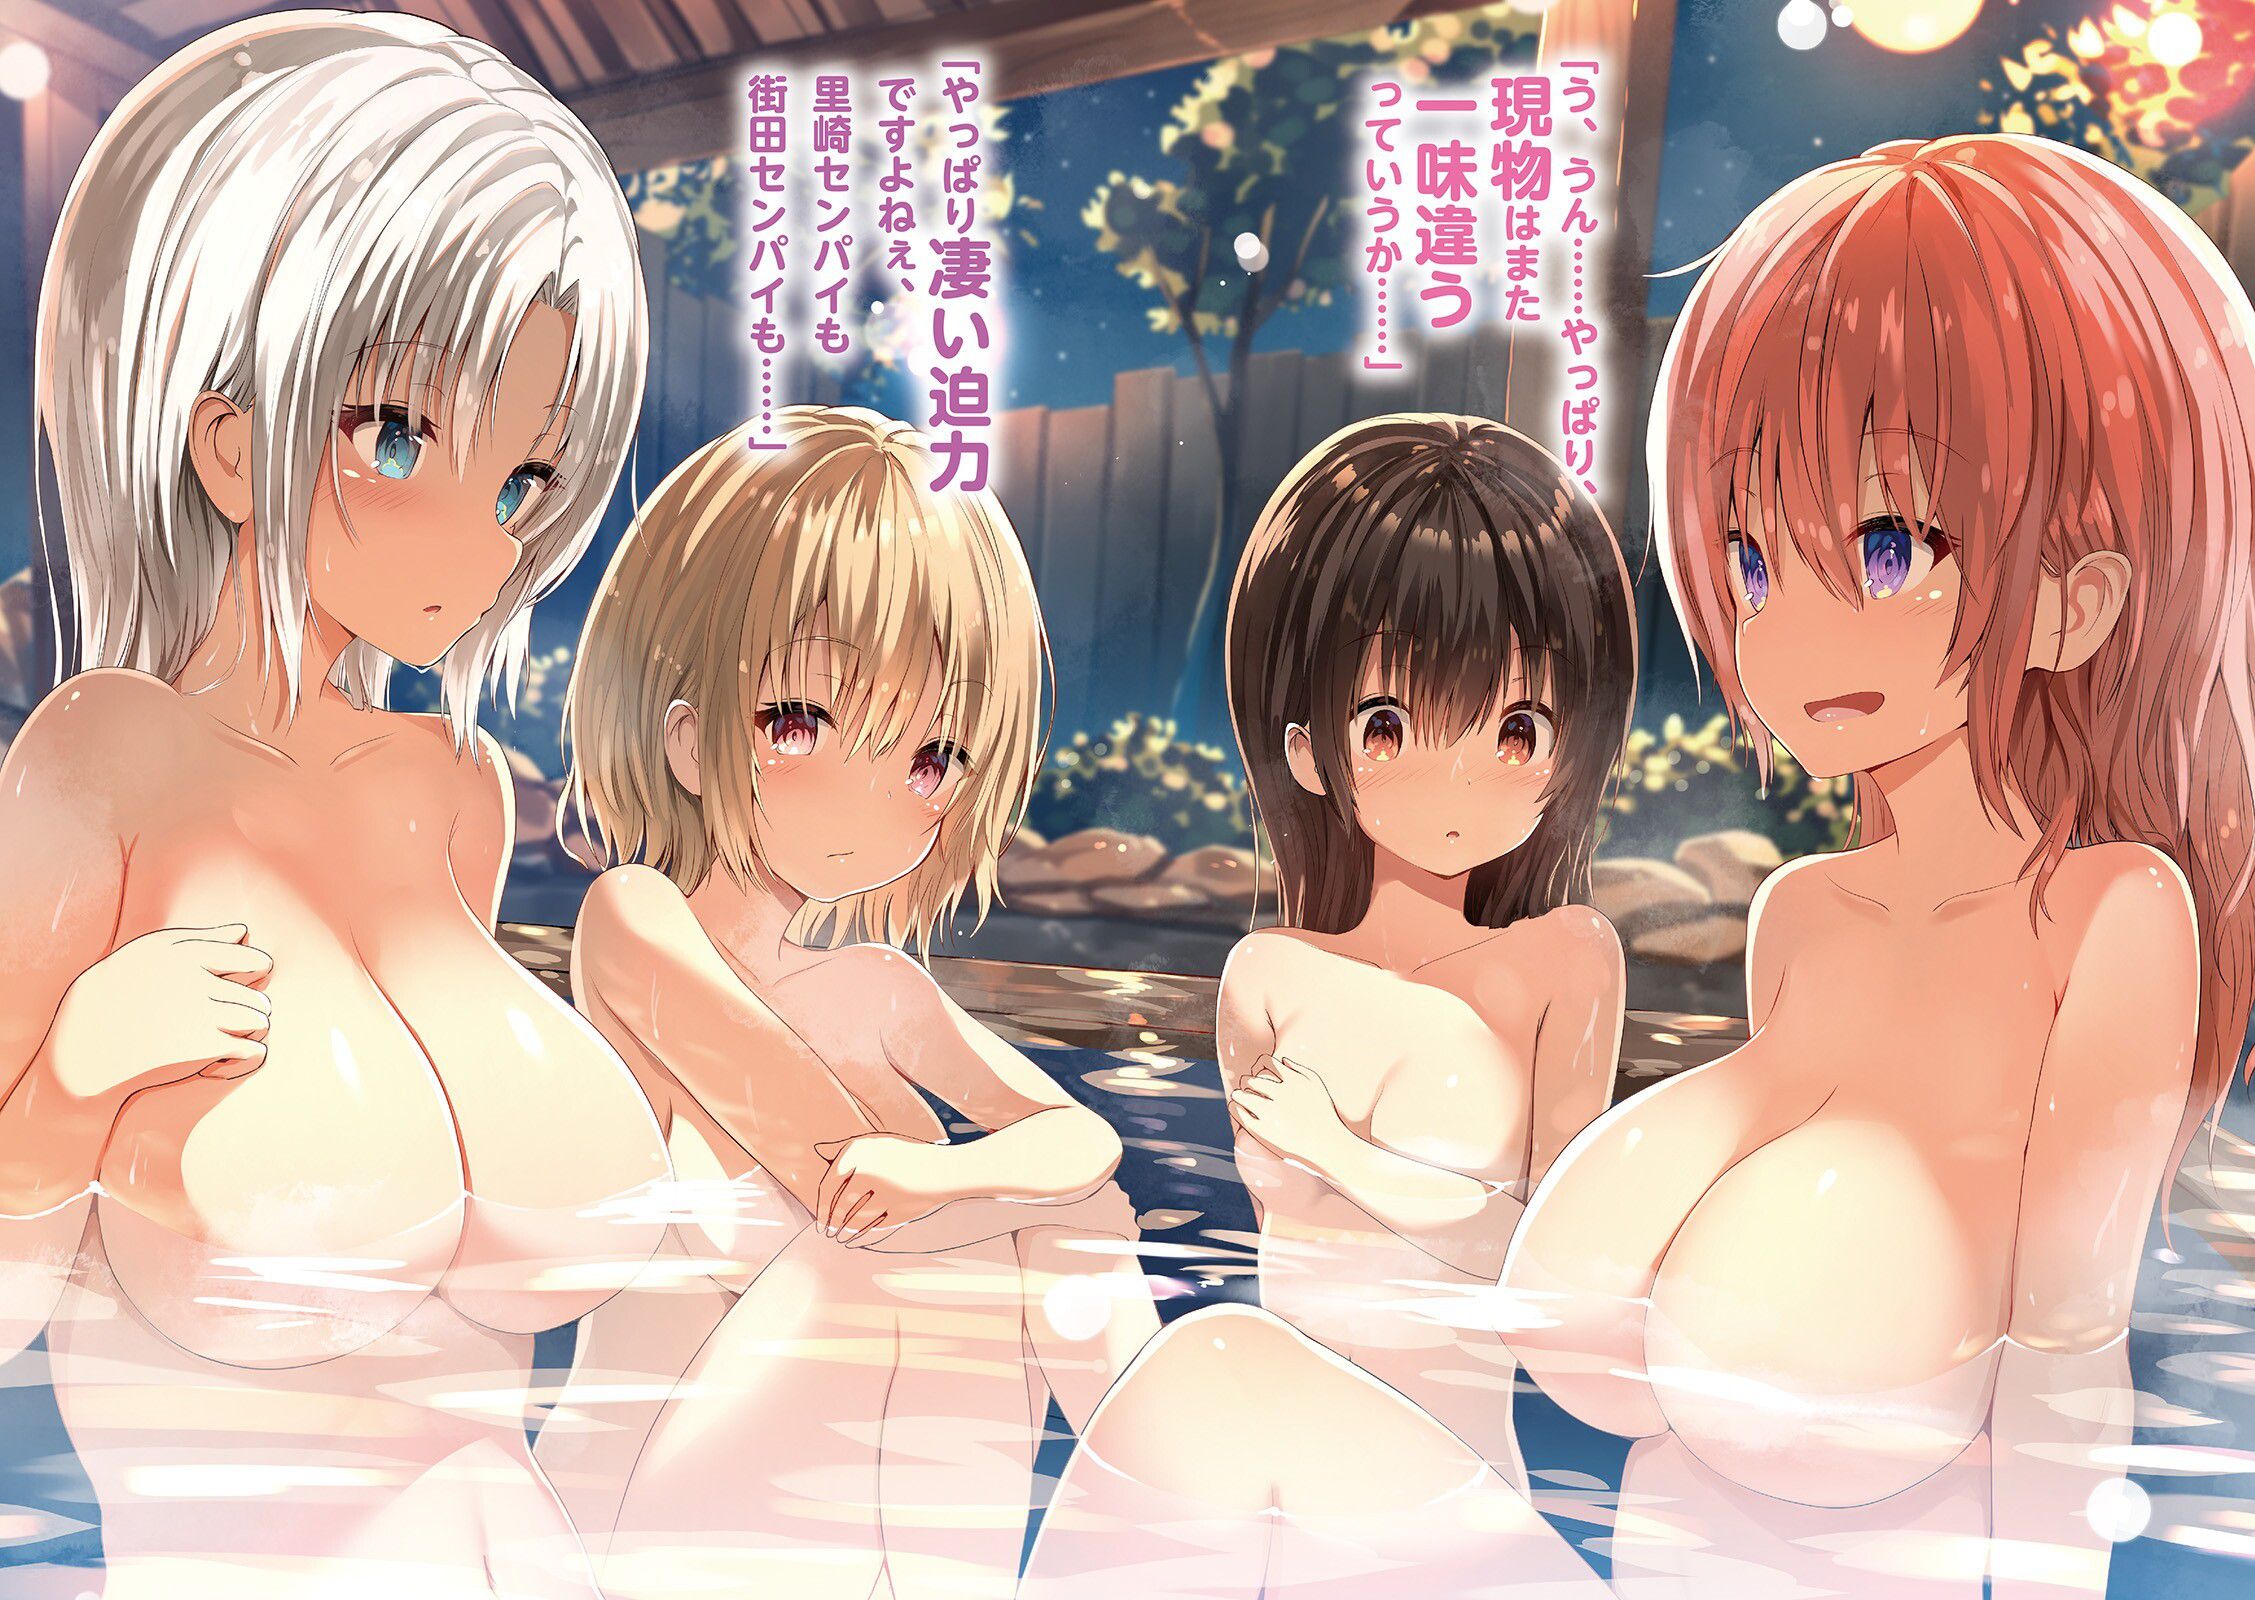 The girl who is taking a bath shows a different expression than usual, so watching it becomes "Ah, beautiful..."! 9